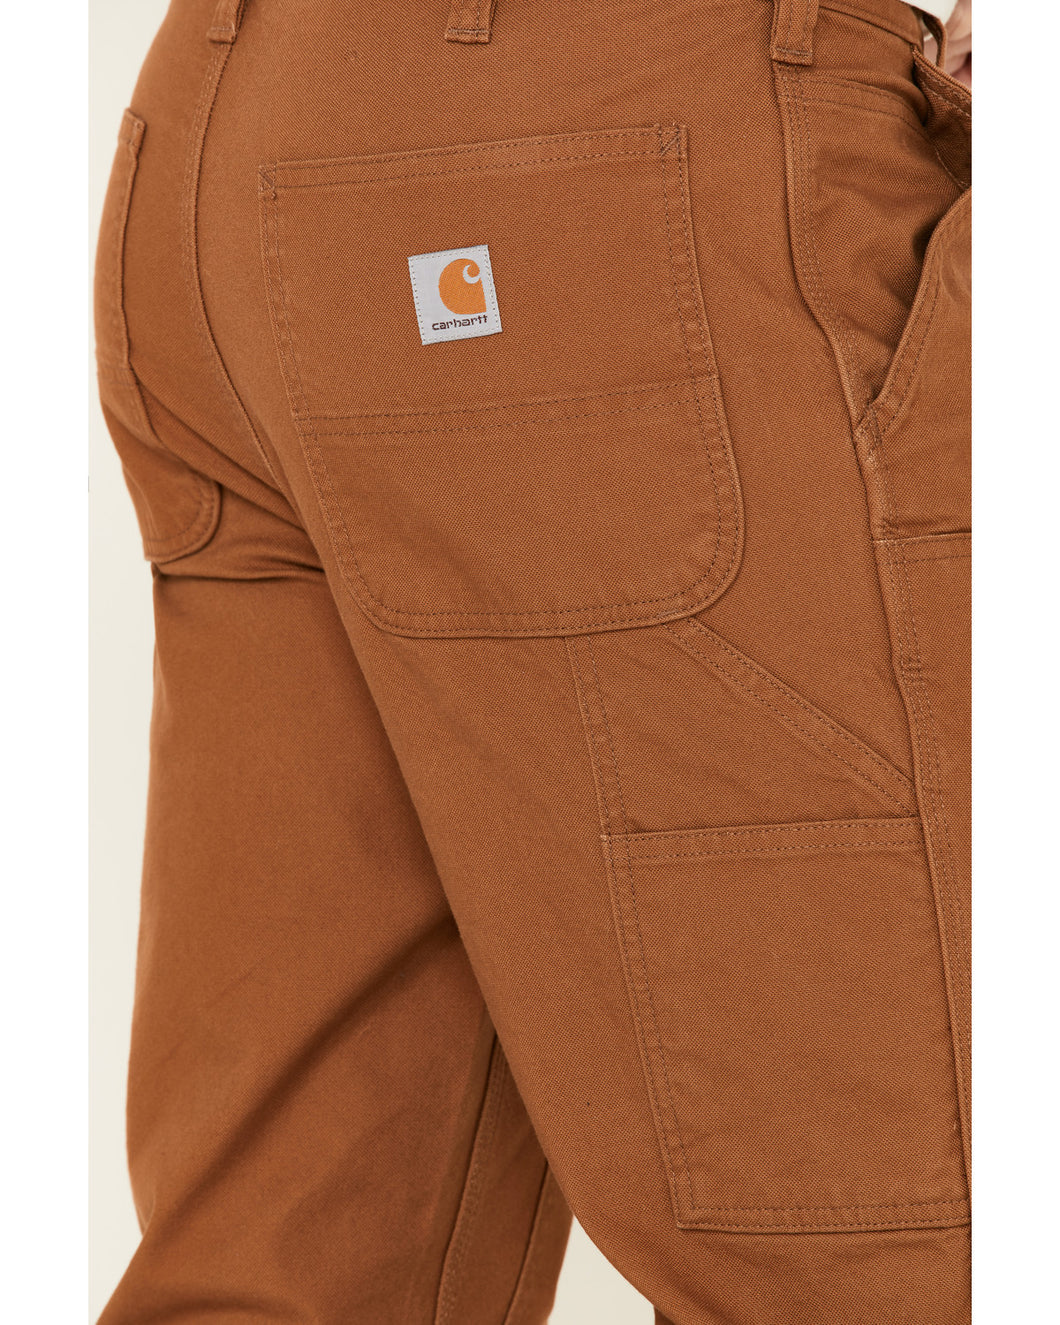 Mens Relaxed Fit Canvas Utility Work Pants - Carhartt - Brown